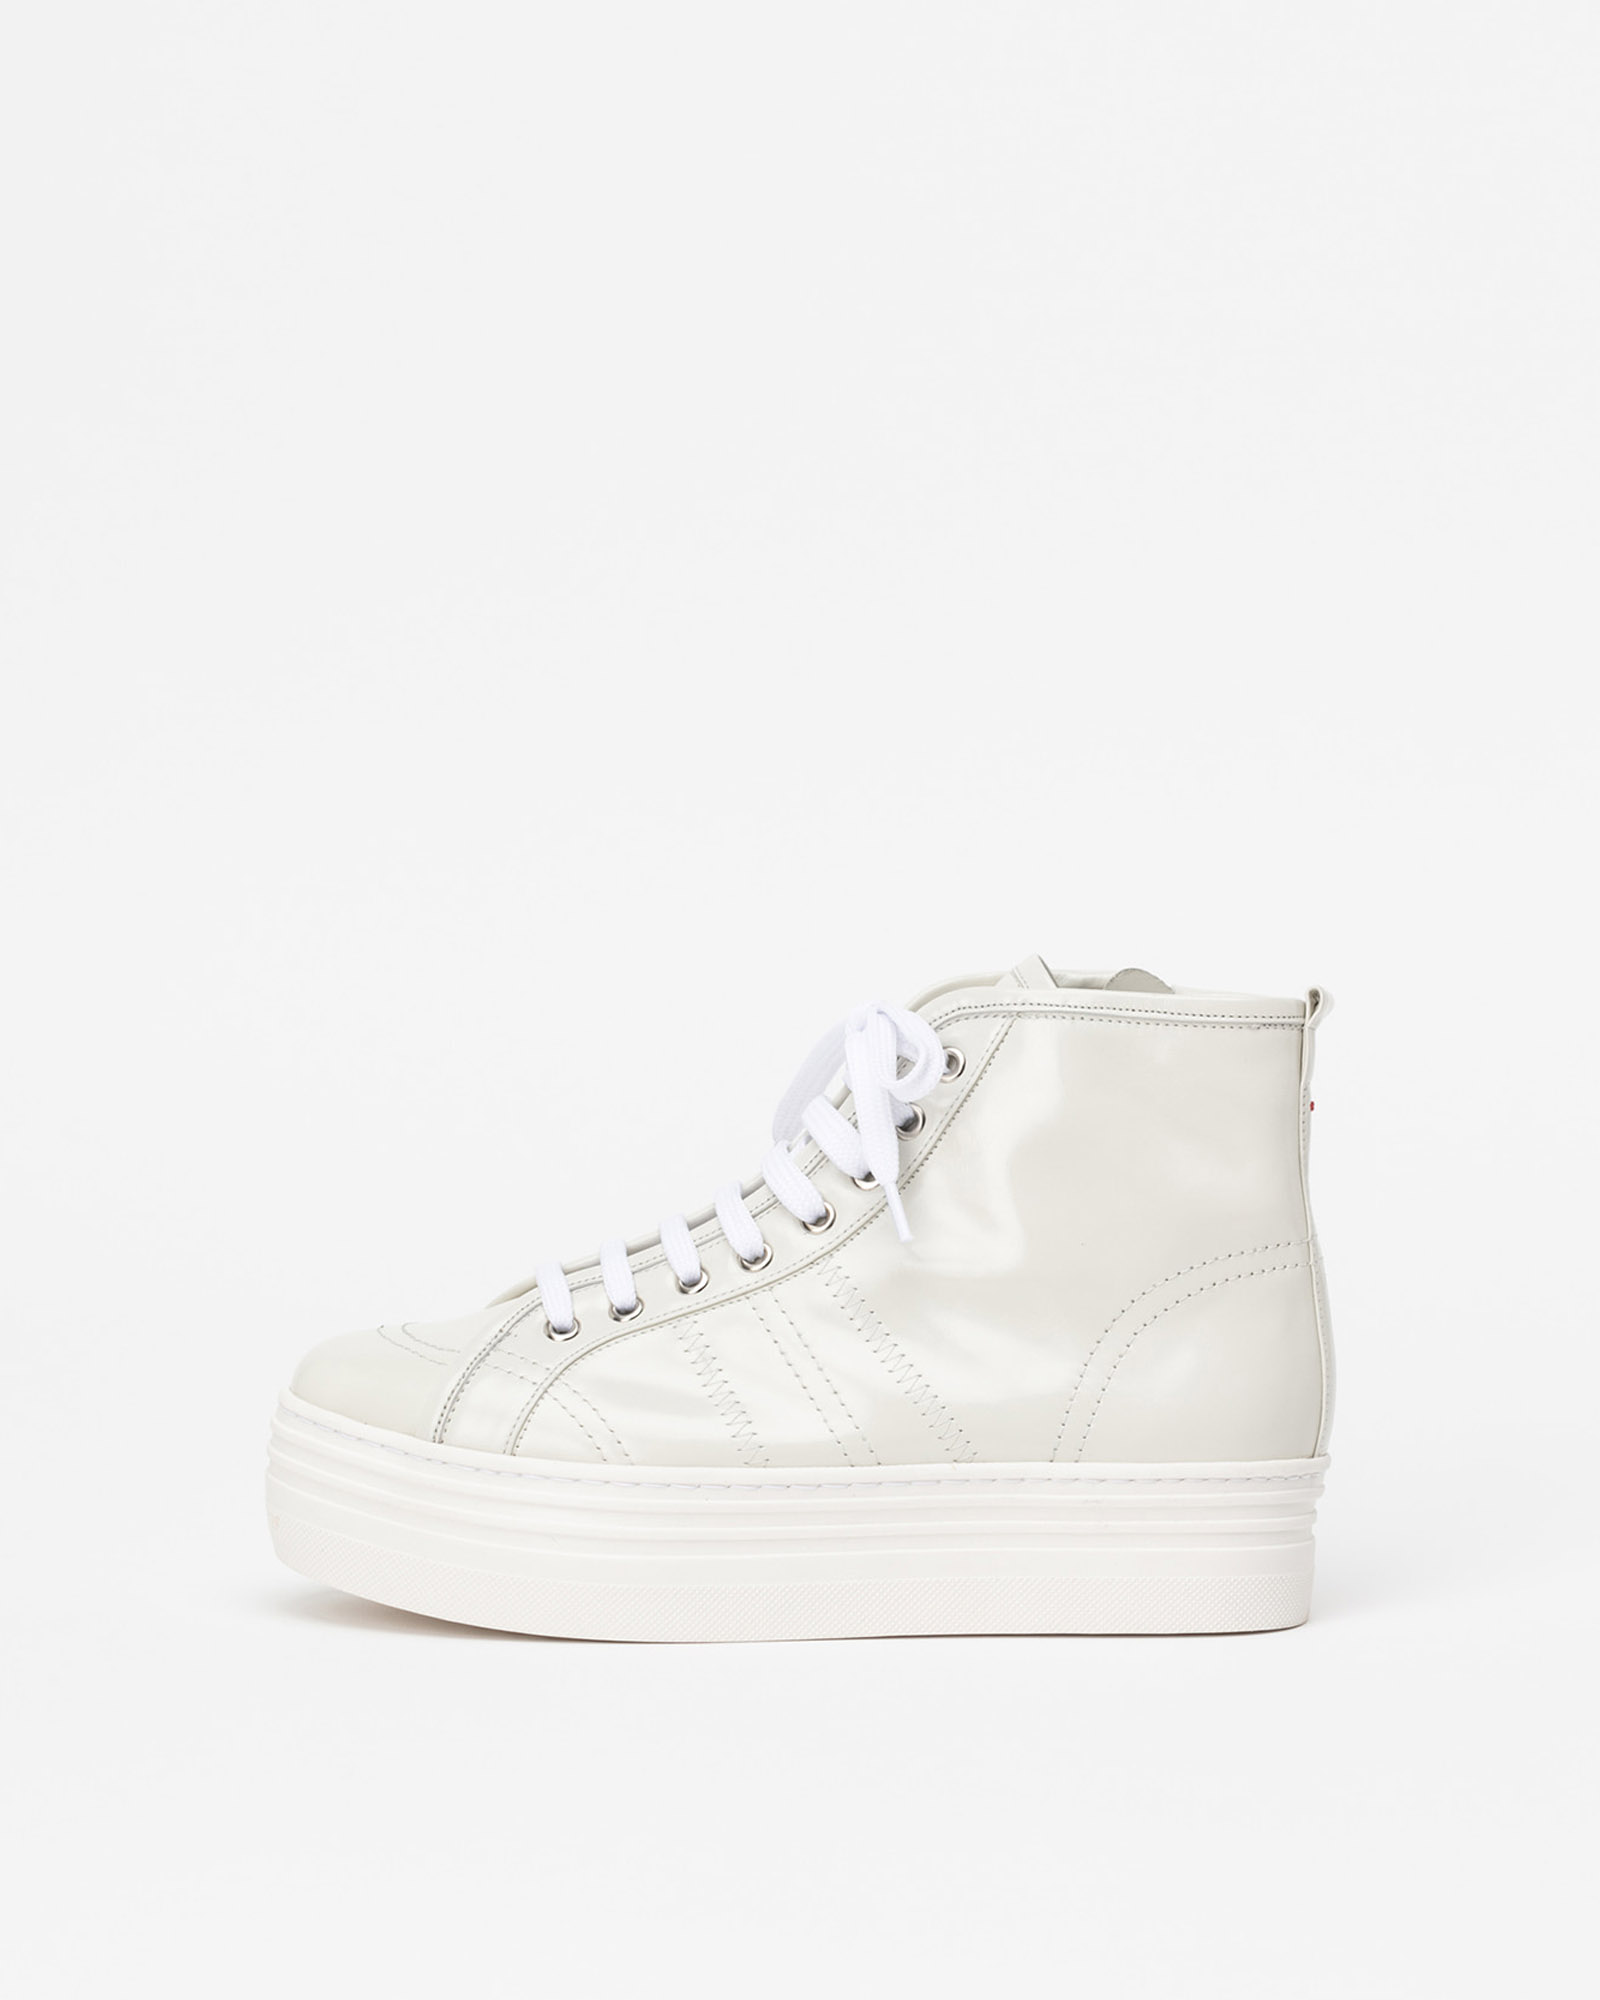 Aveline High-top Lace-up Sneakers in Textured Ivory